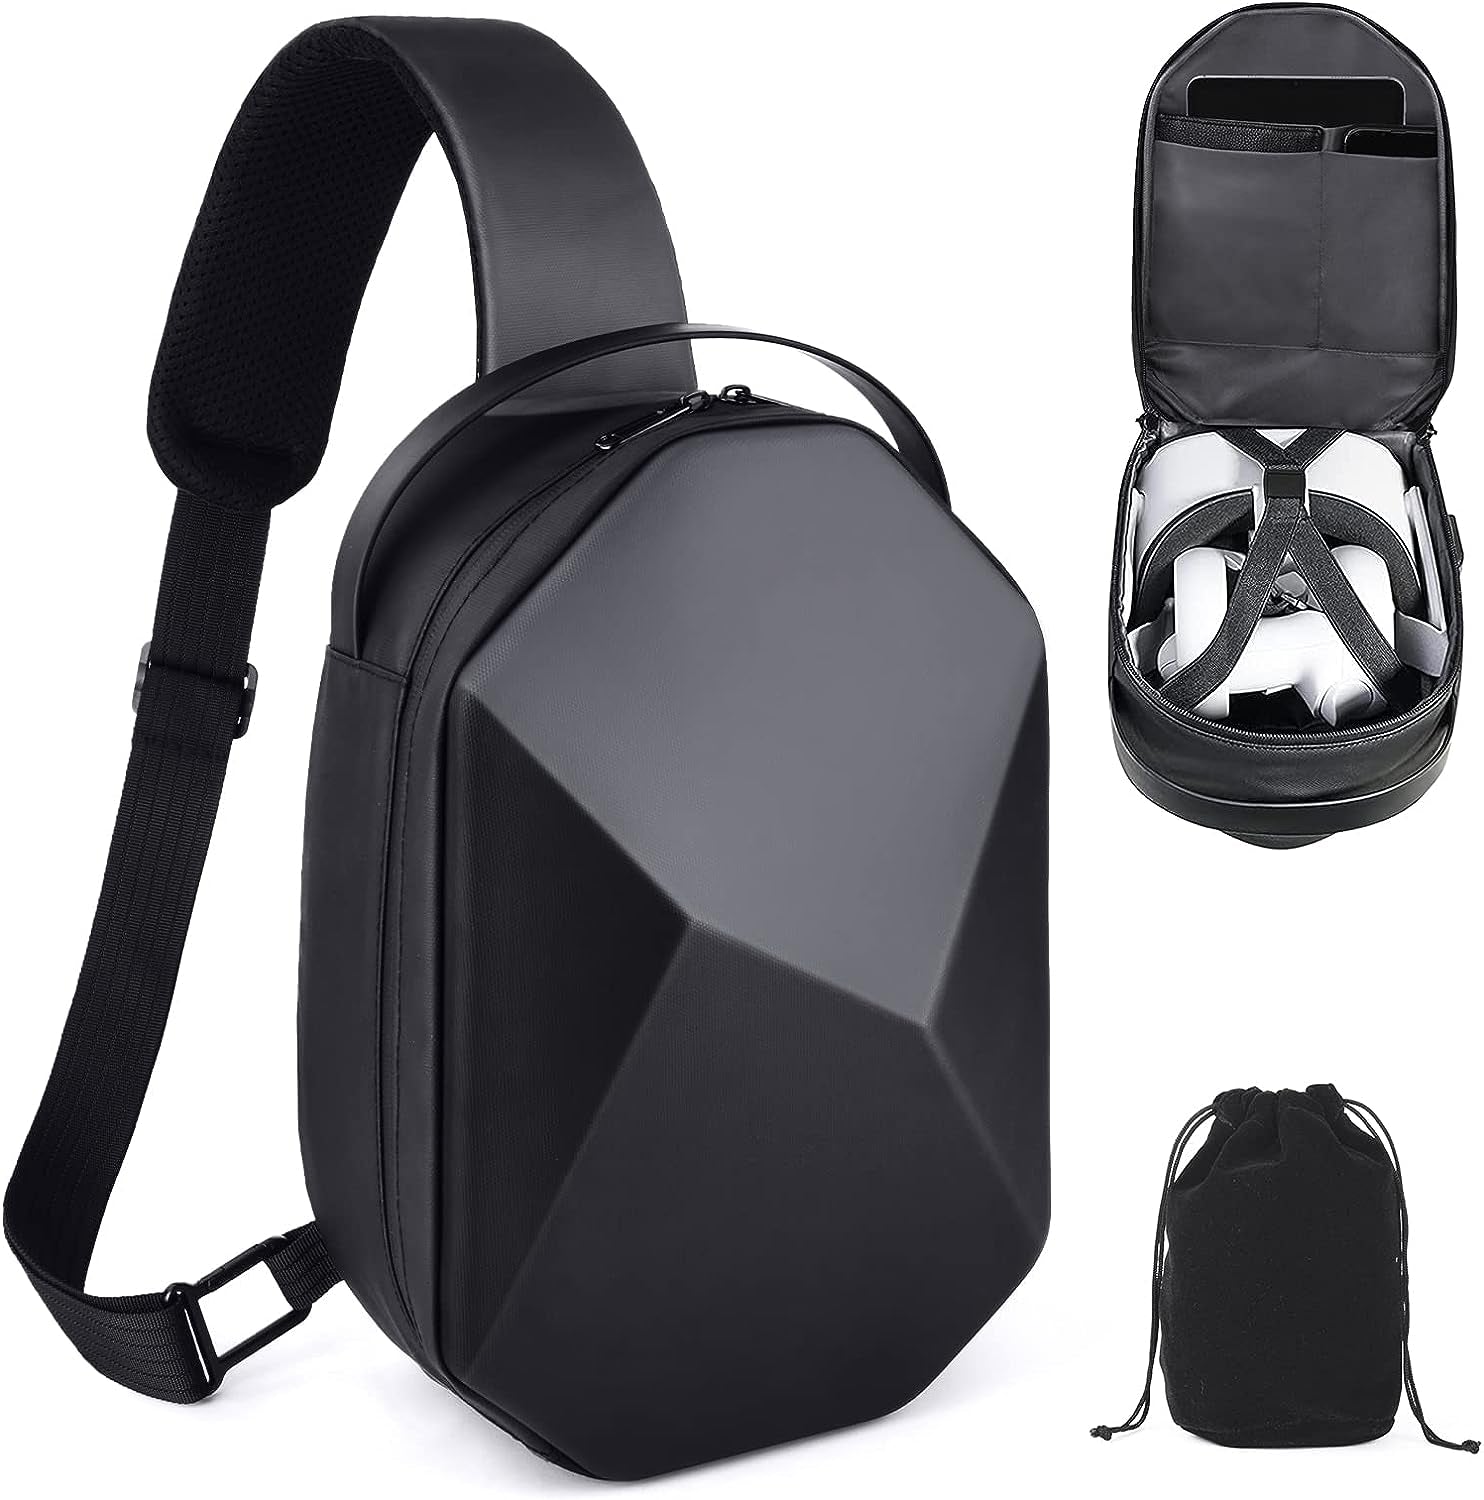 Protective Hard Carrying Case for Oculus Quest 2 VR Headsets and Controllers, Waterproof Crossbody Shoulder Chest Backpack with Elite Strap 